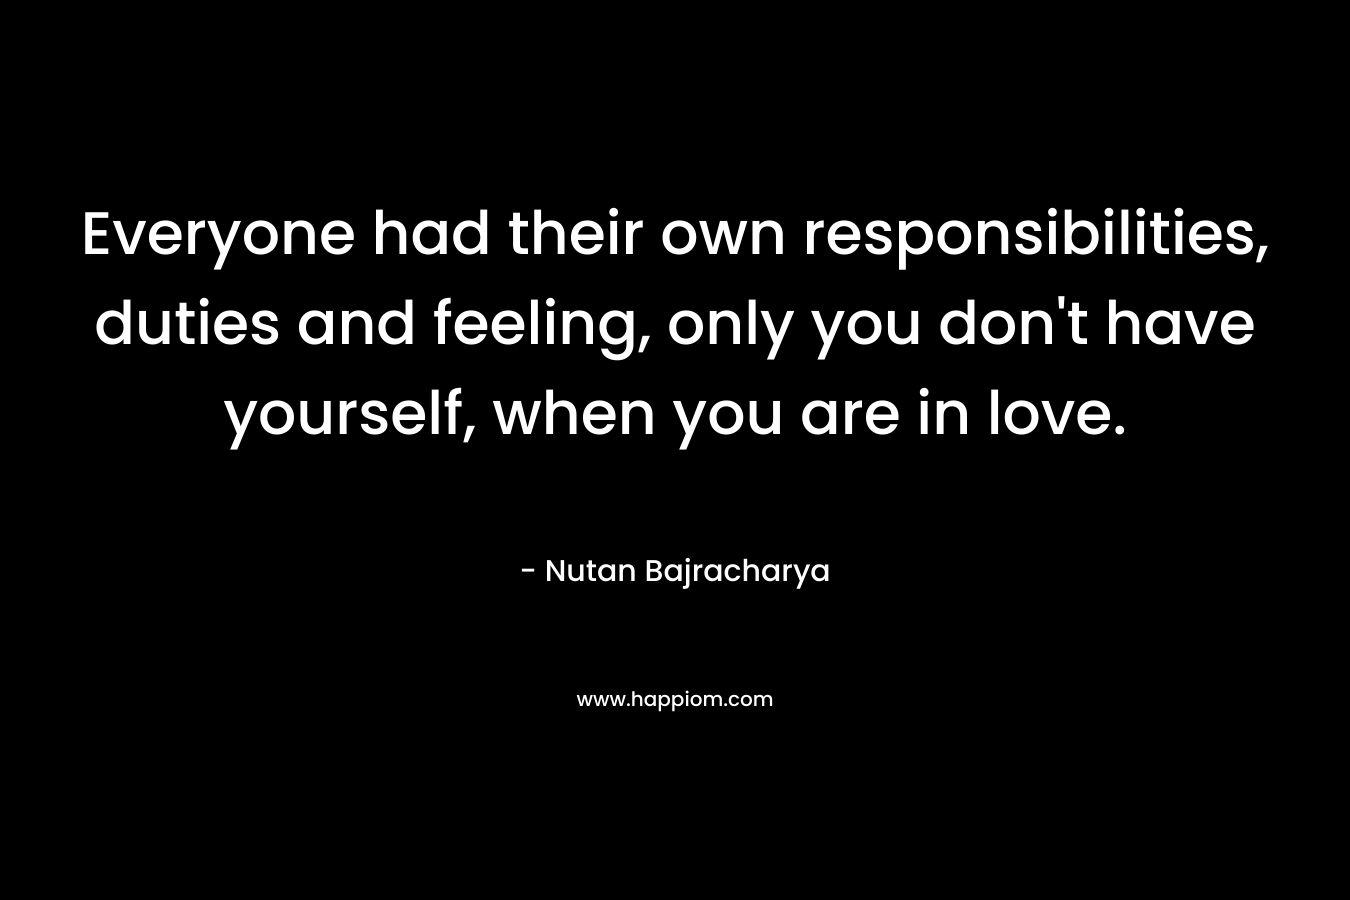 Everyone had their own responsibilities, duties and feeling, only you don't have yourself, when you are in love.